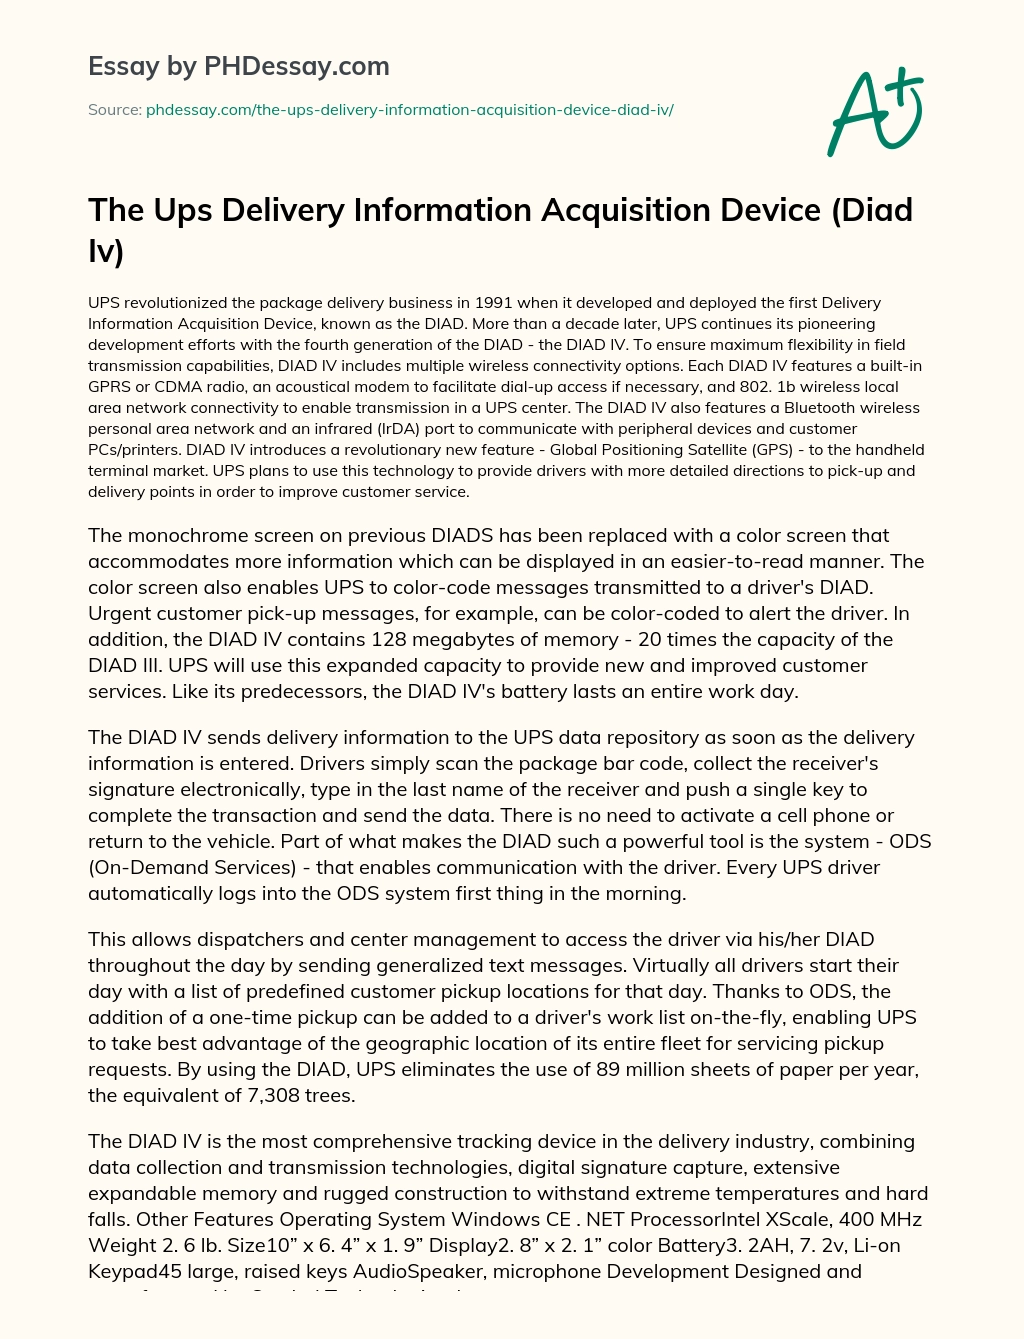 The UPS Delivery Information Acquisition Device (DIAD IV) essay